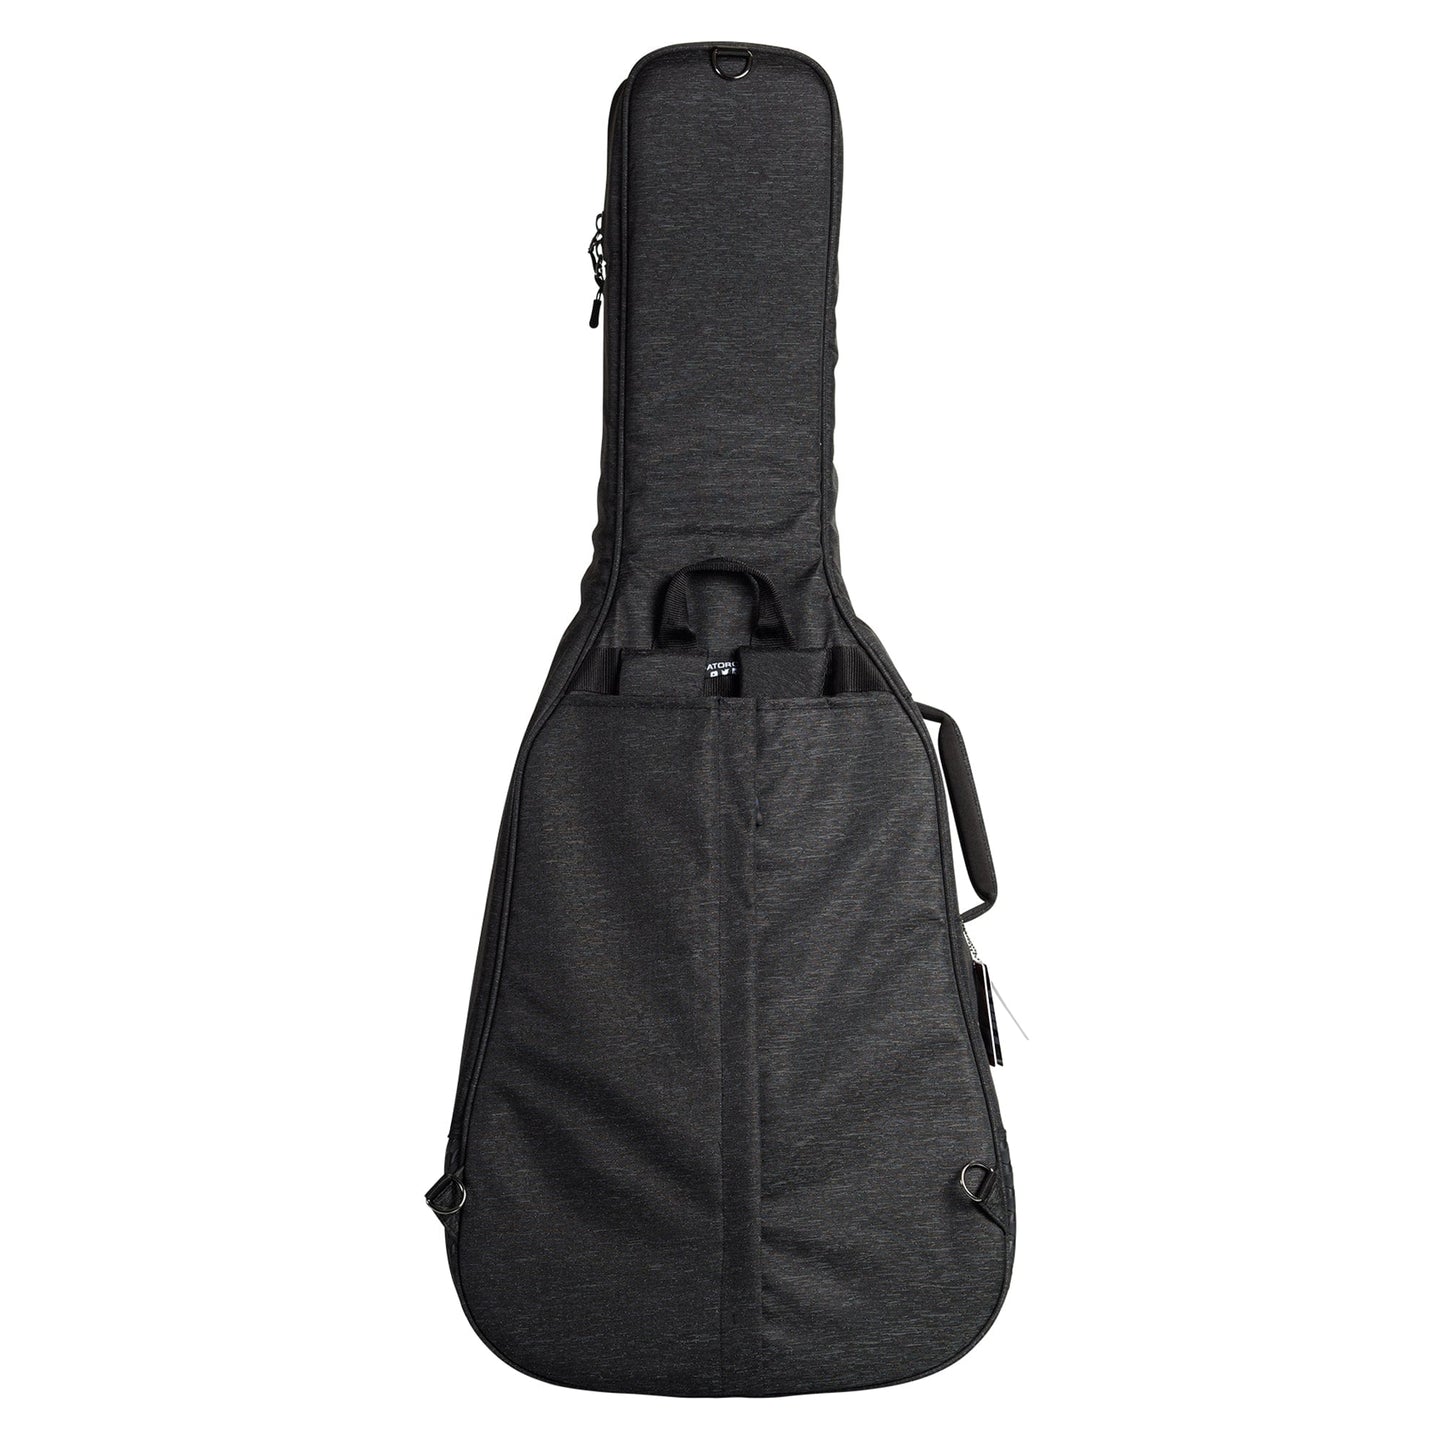 Gator Transit Acoustic Guitar Gig Bag Charcoal Black Accessories / Cases and Gig Bags / Guitar Cases